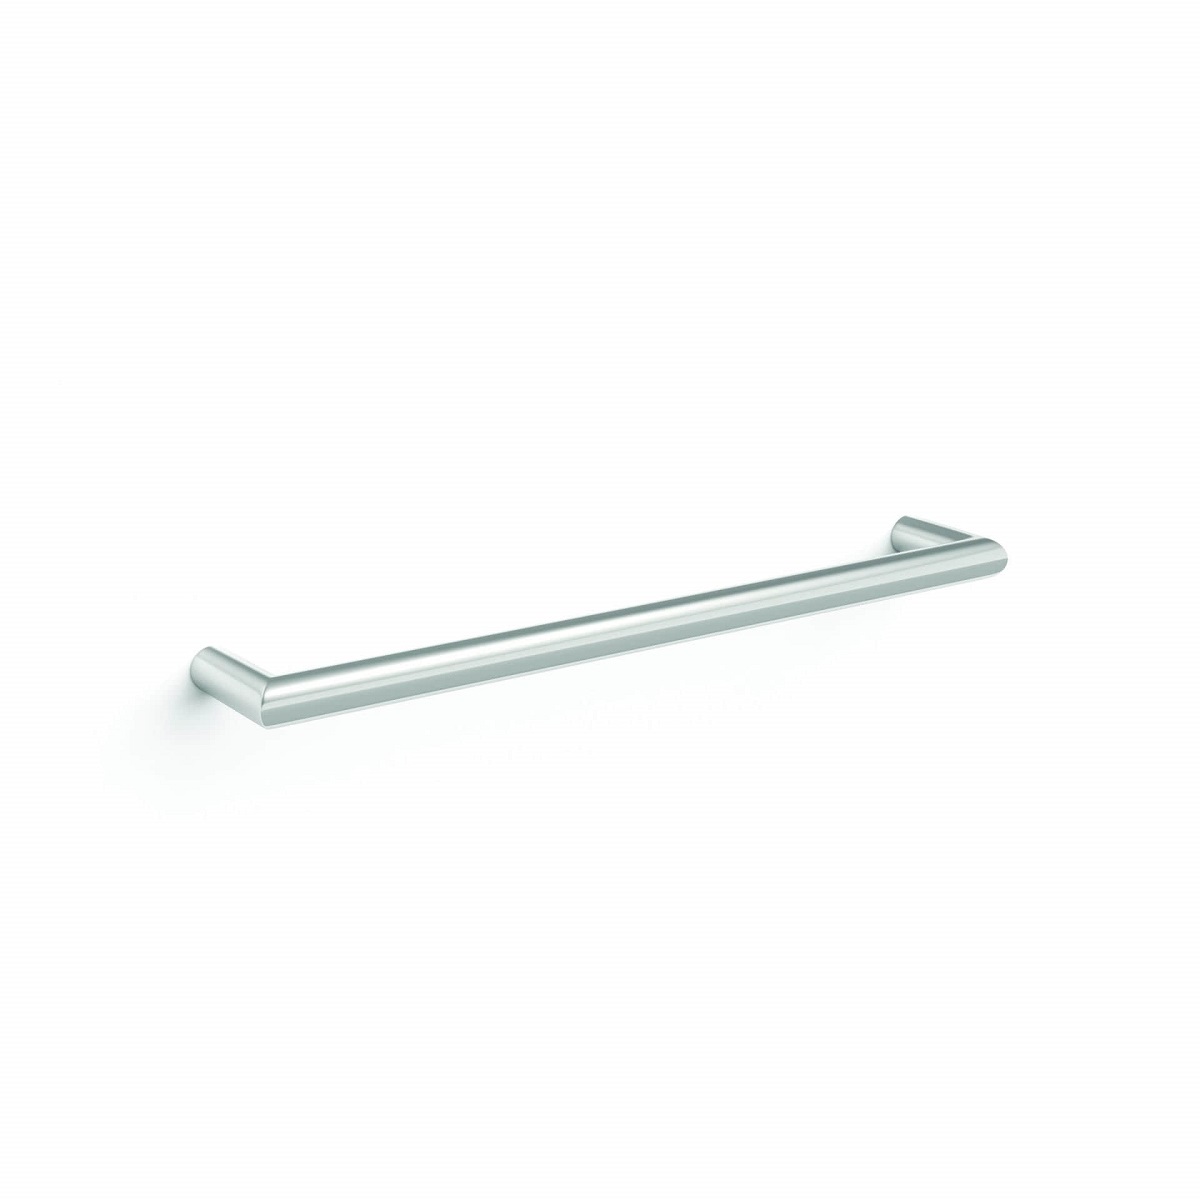 Infinity Plus bathrooms supplies luxury tap ware and bathroom fittings like this Thermogroup Single round heated towel rail in polish stainless finish